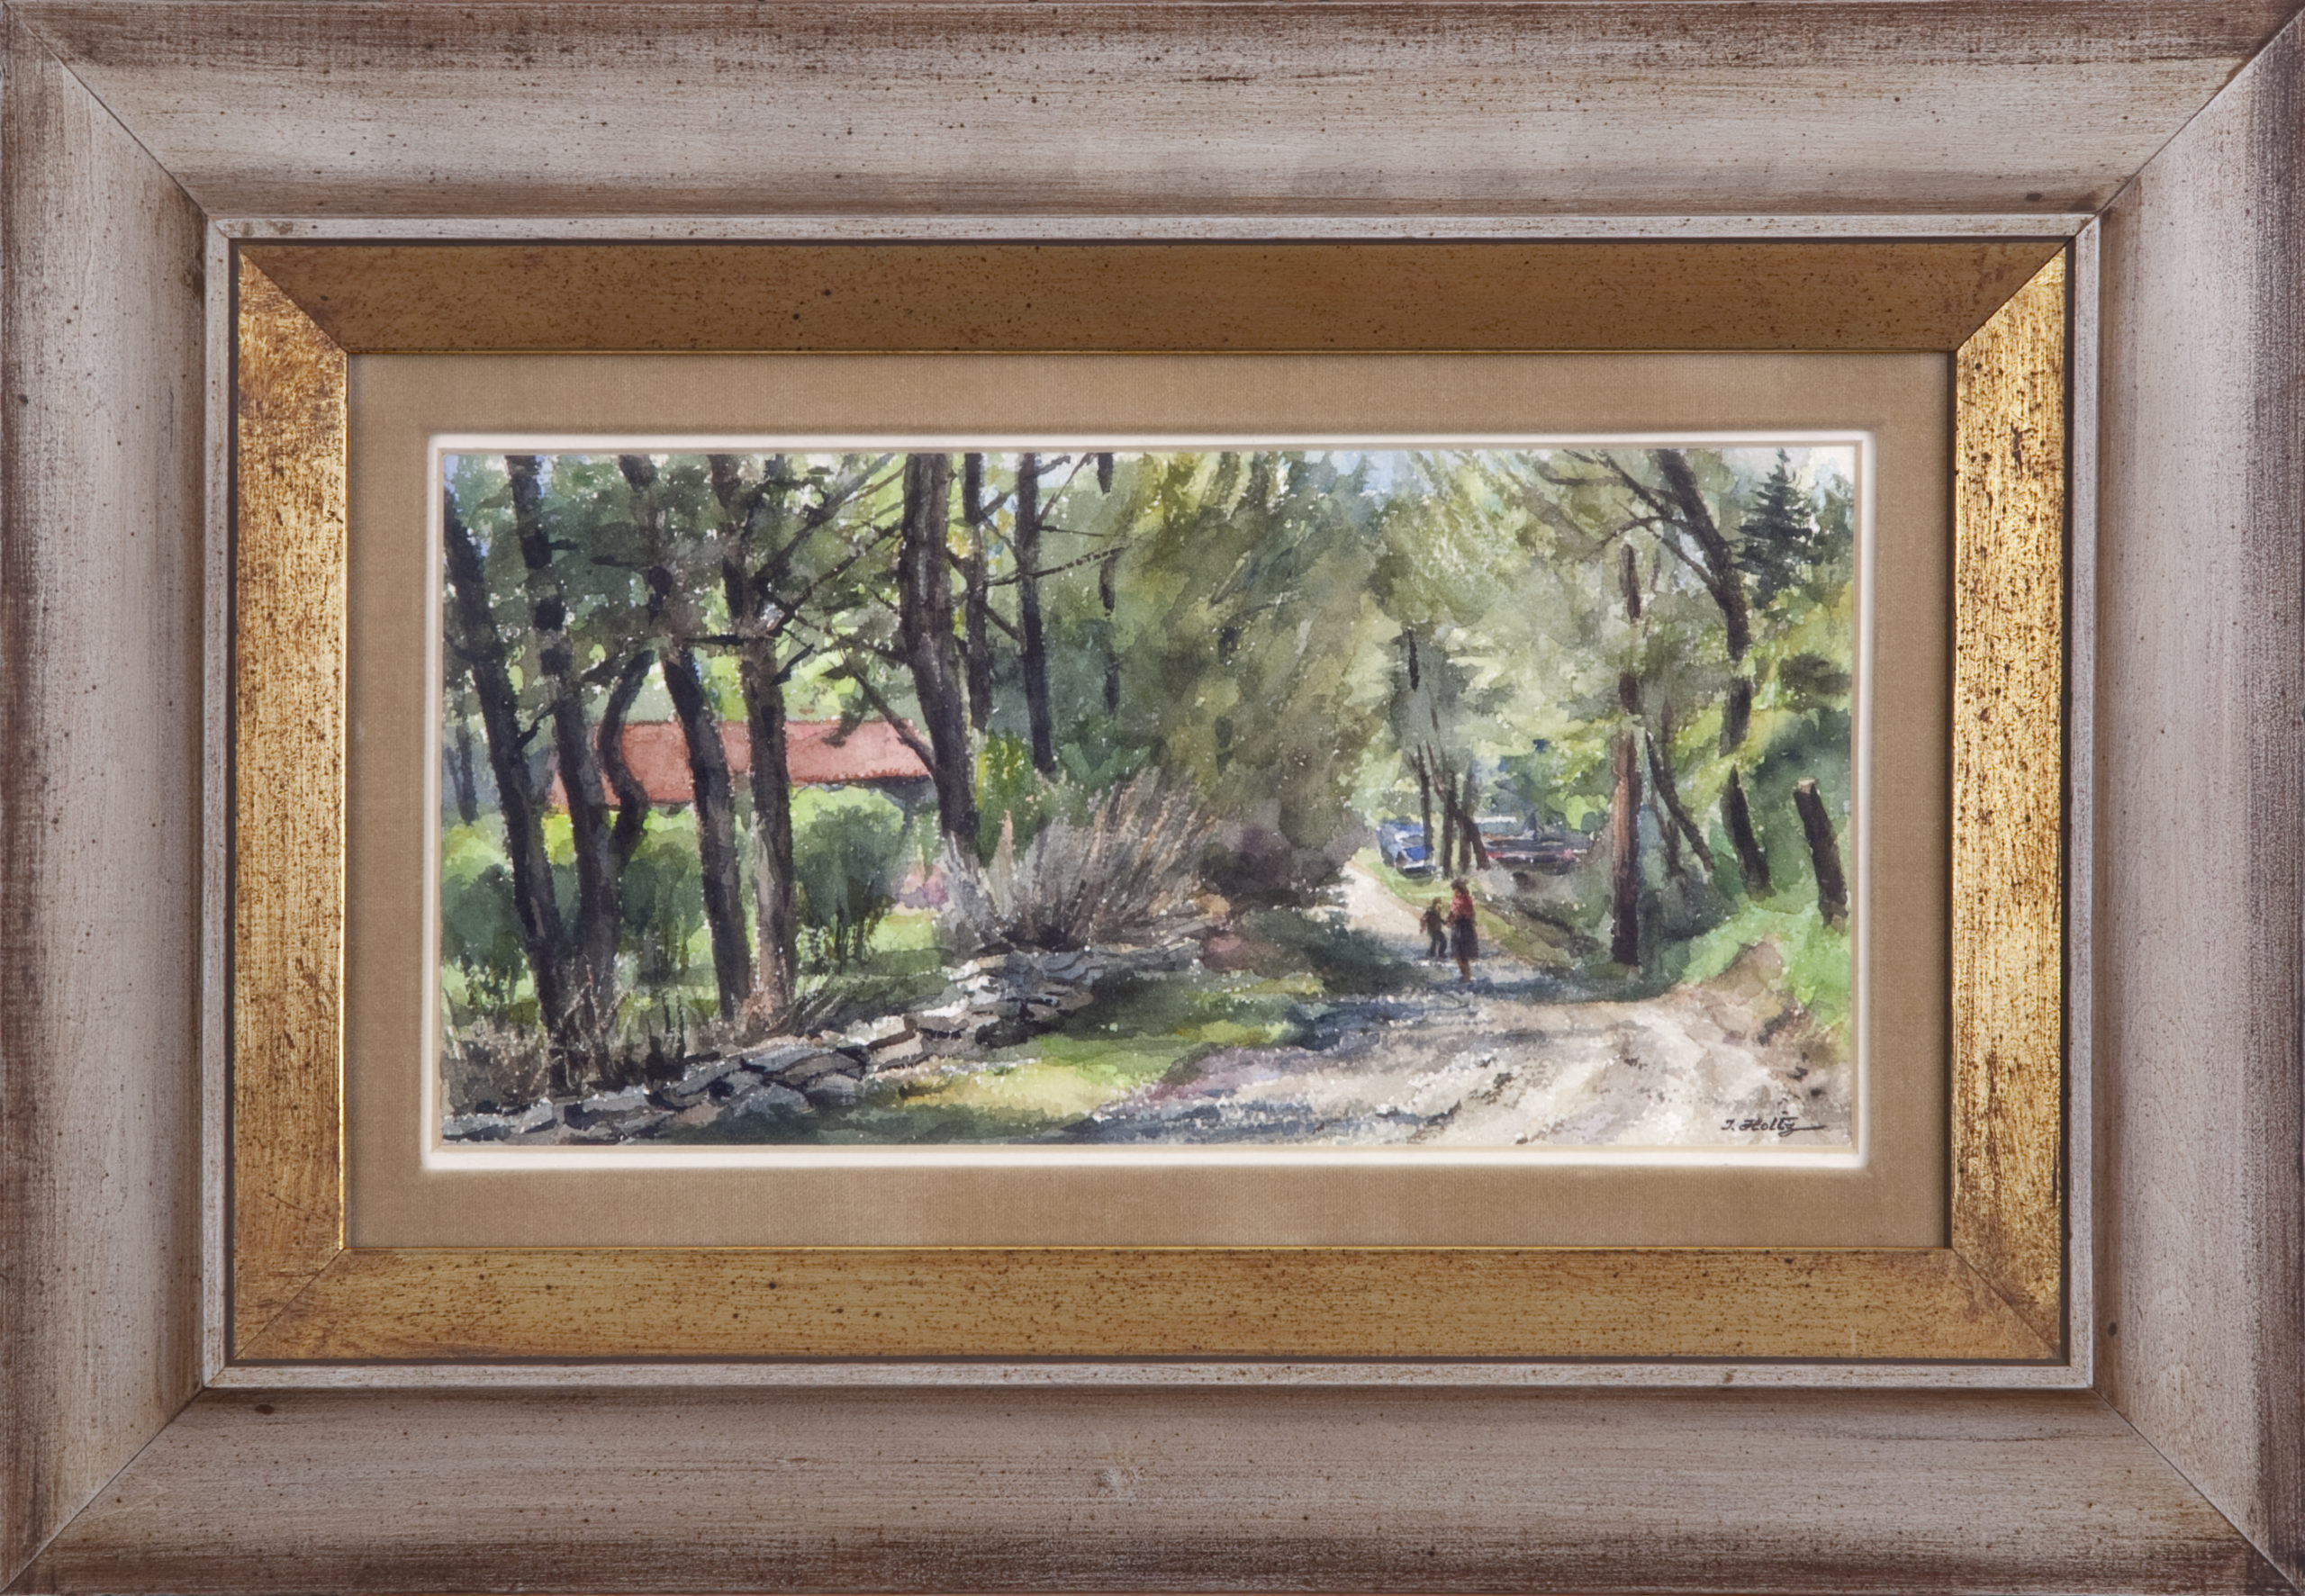 234 Country Road in Summer 1968 - Watercolor - 12 x 6.5 - Frame: 19.5 x 13.75 x 1.25